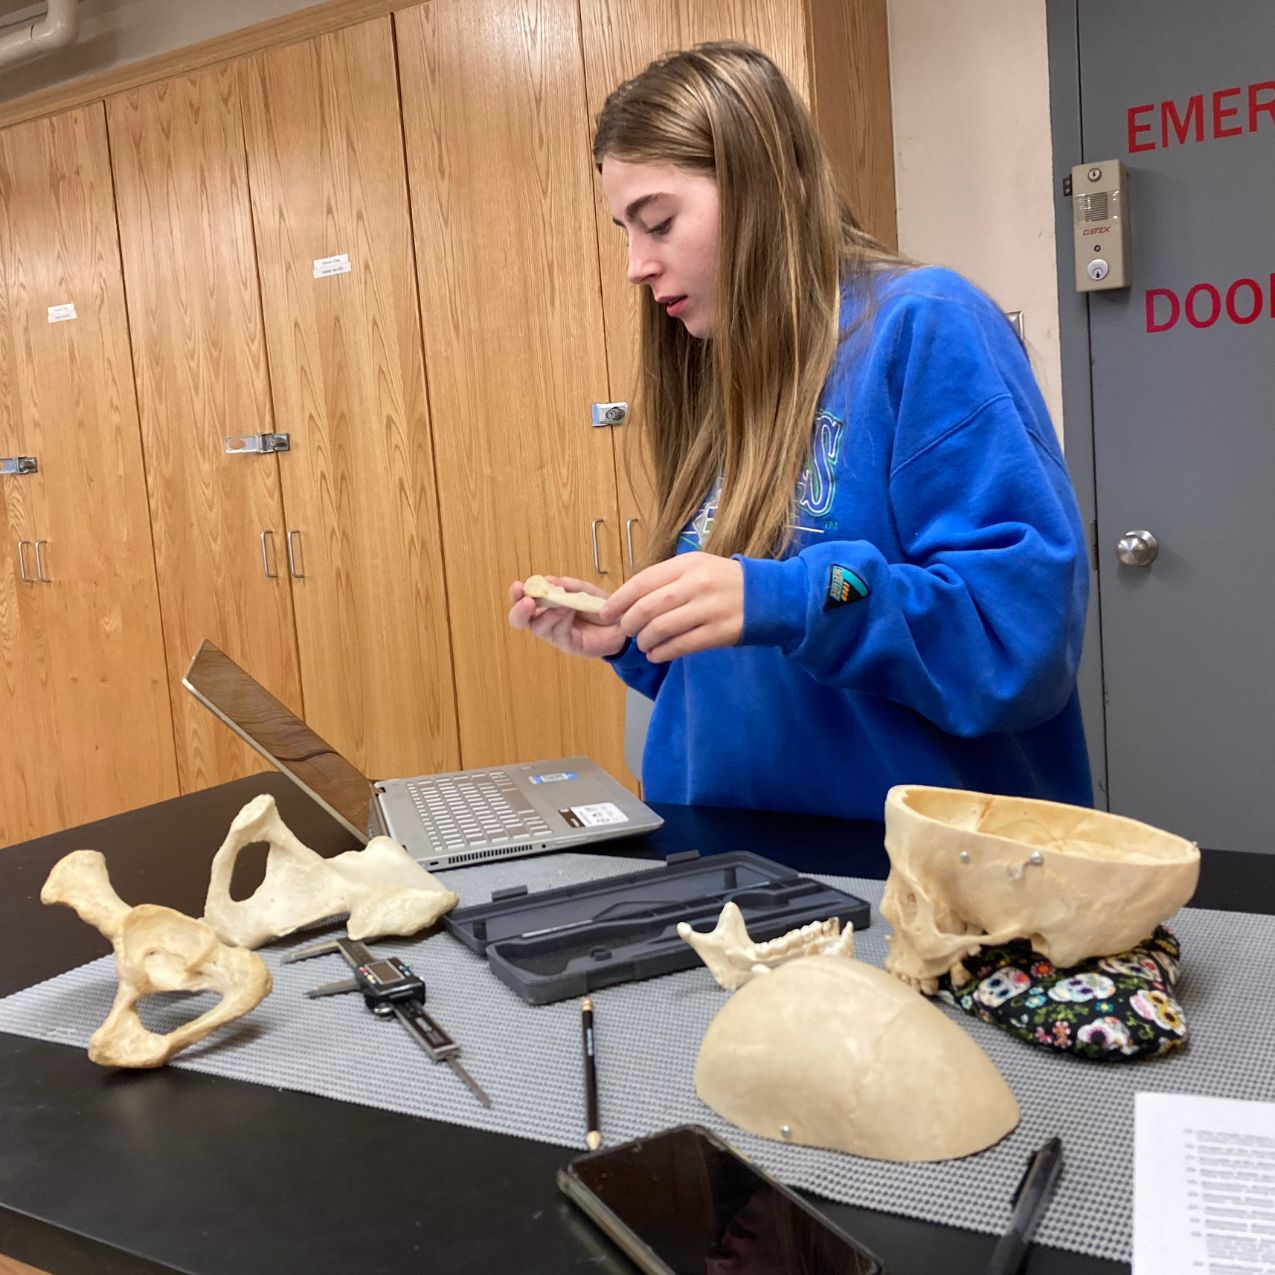 A student works in the anthropology lab. Standing at a lab table with bones and a laptop, she looks at a bone.